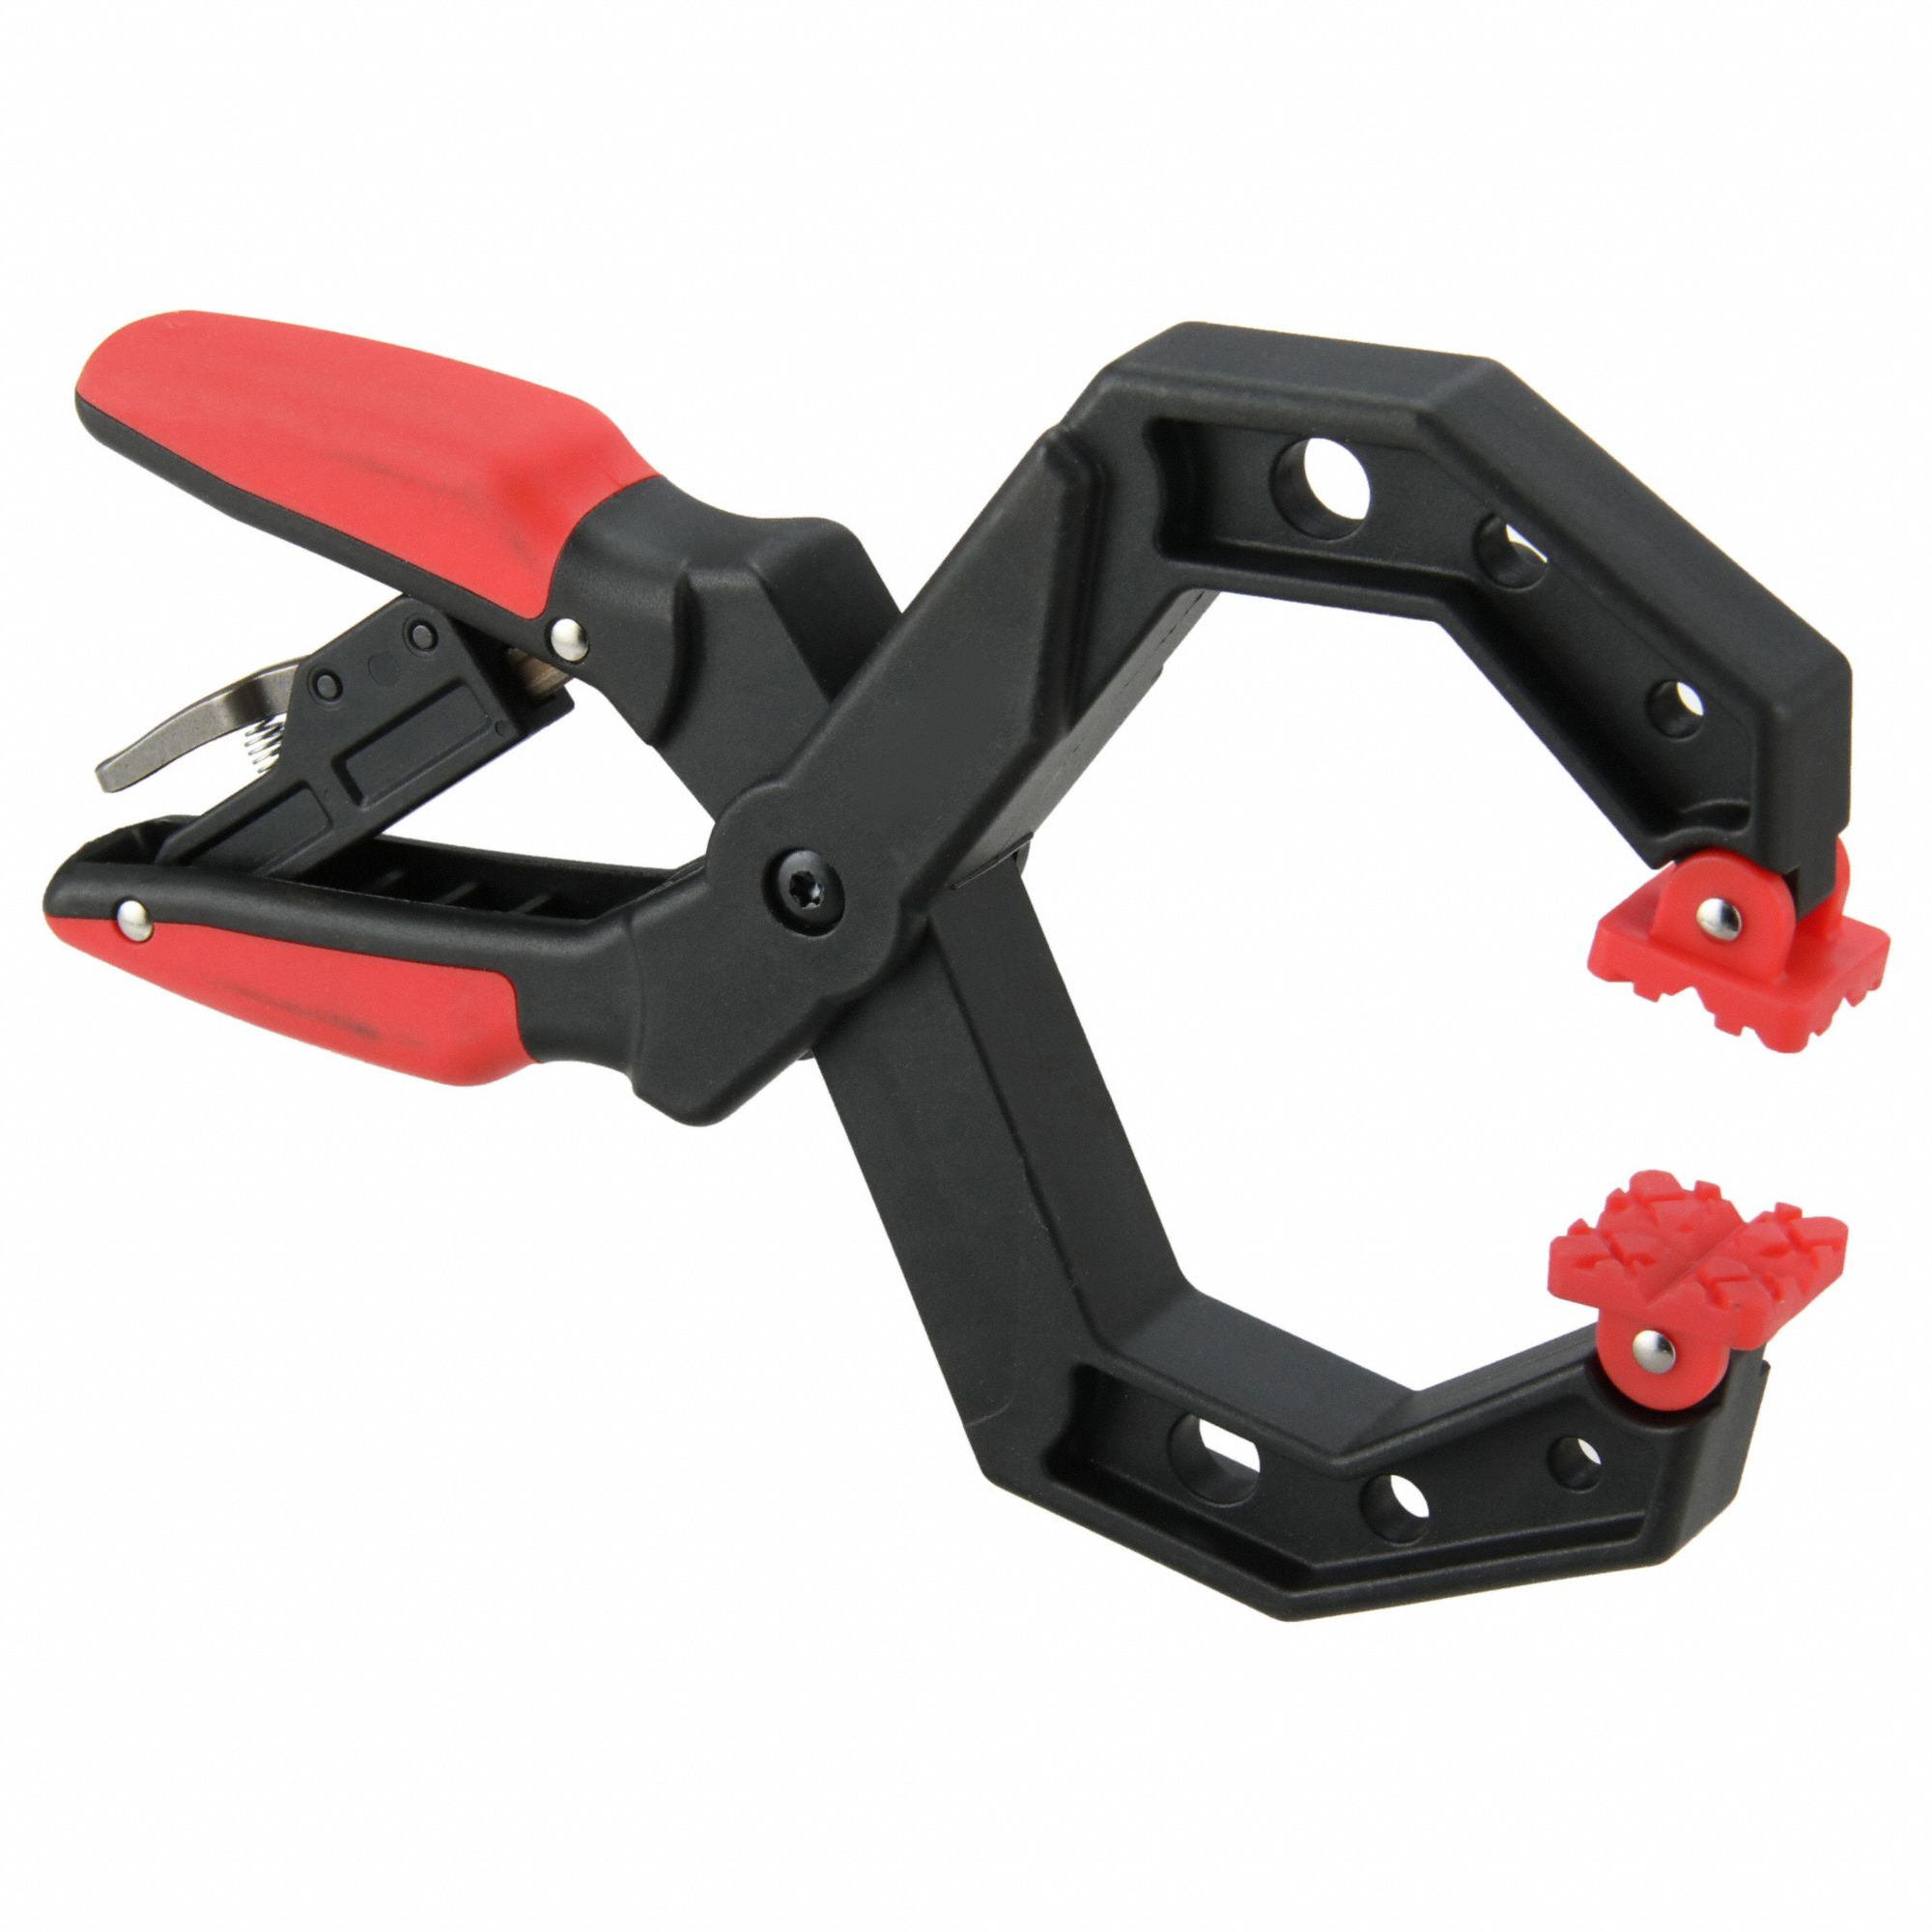 Spring Grip Clip Pointed Long Service Life 2/3inch Heavy Duty Red Spring  Clamp